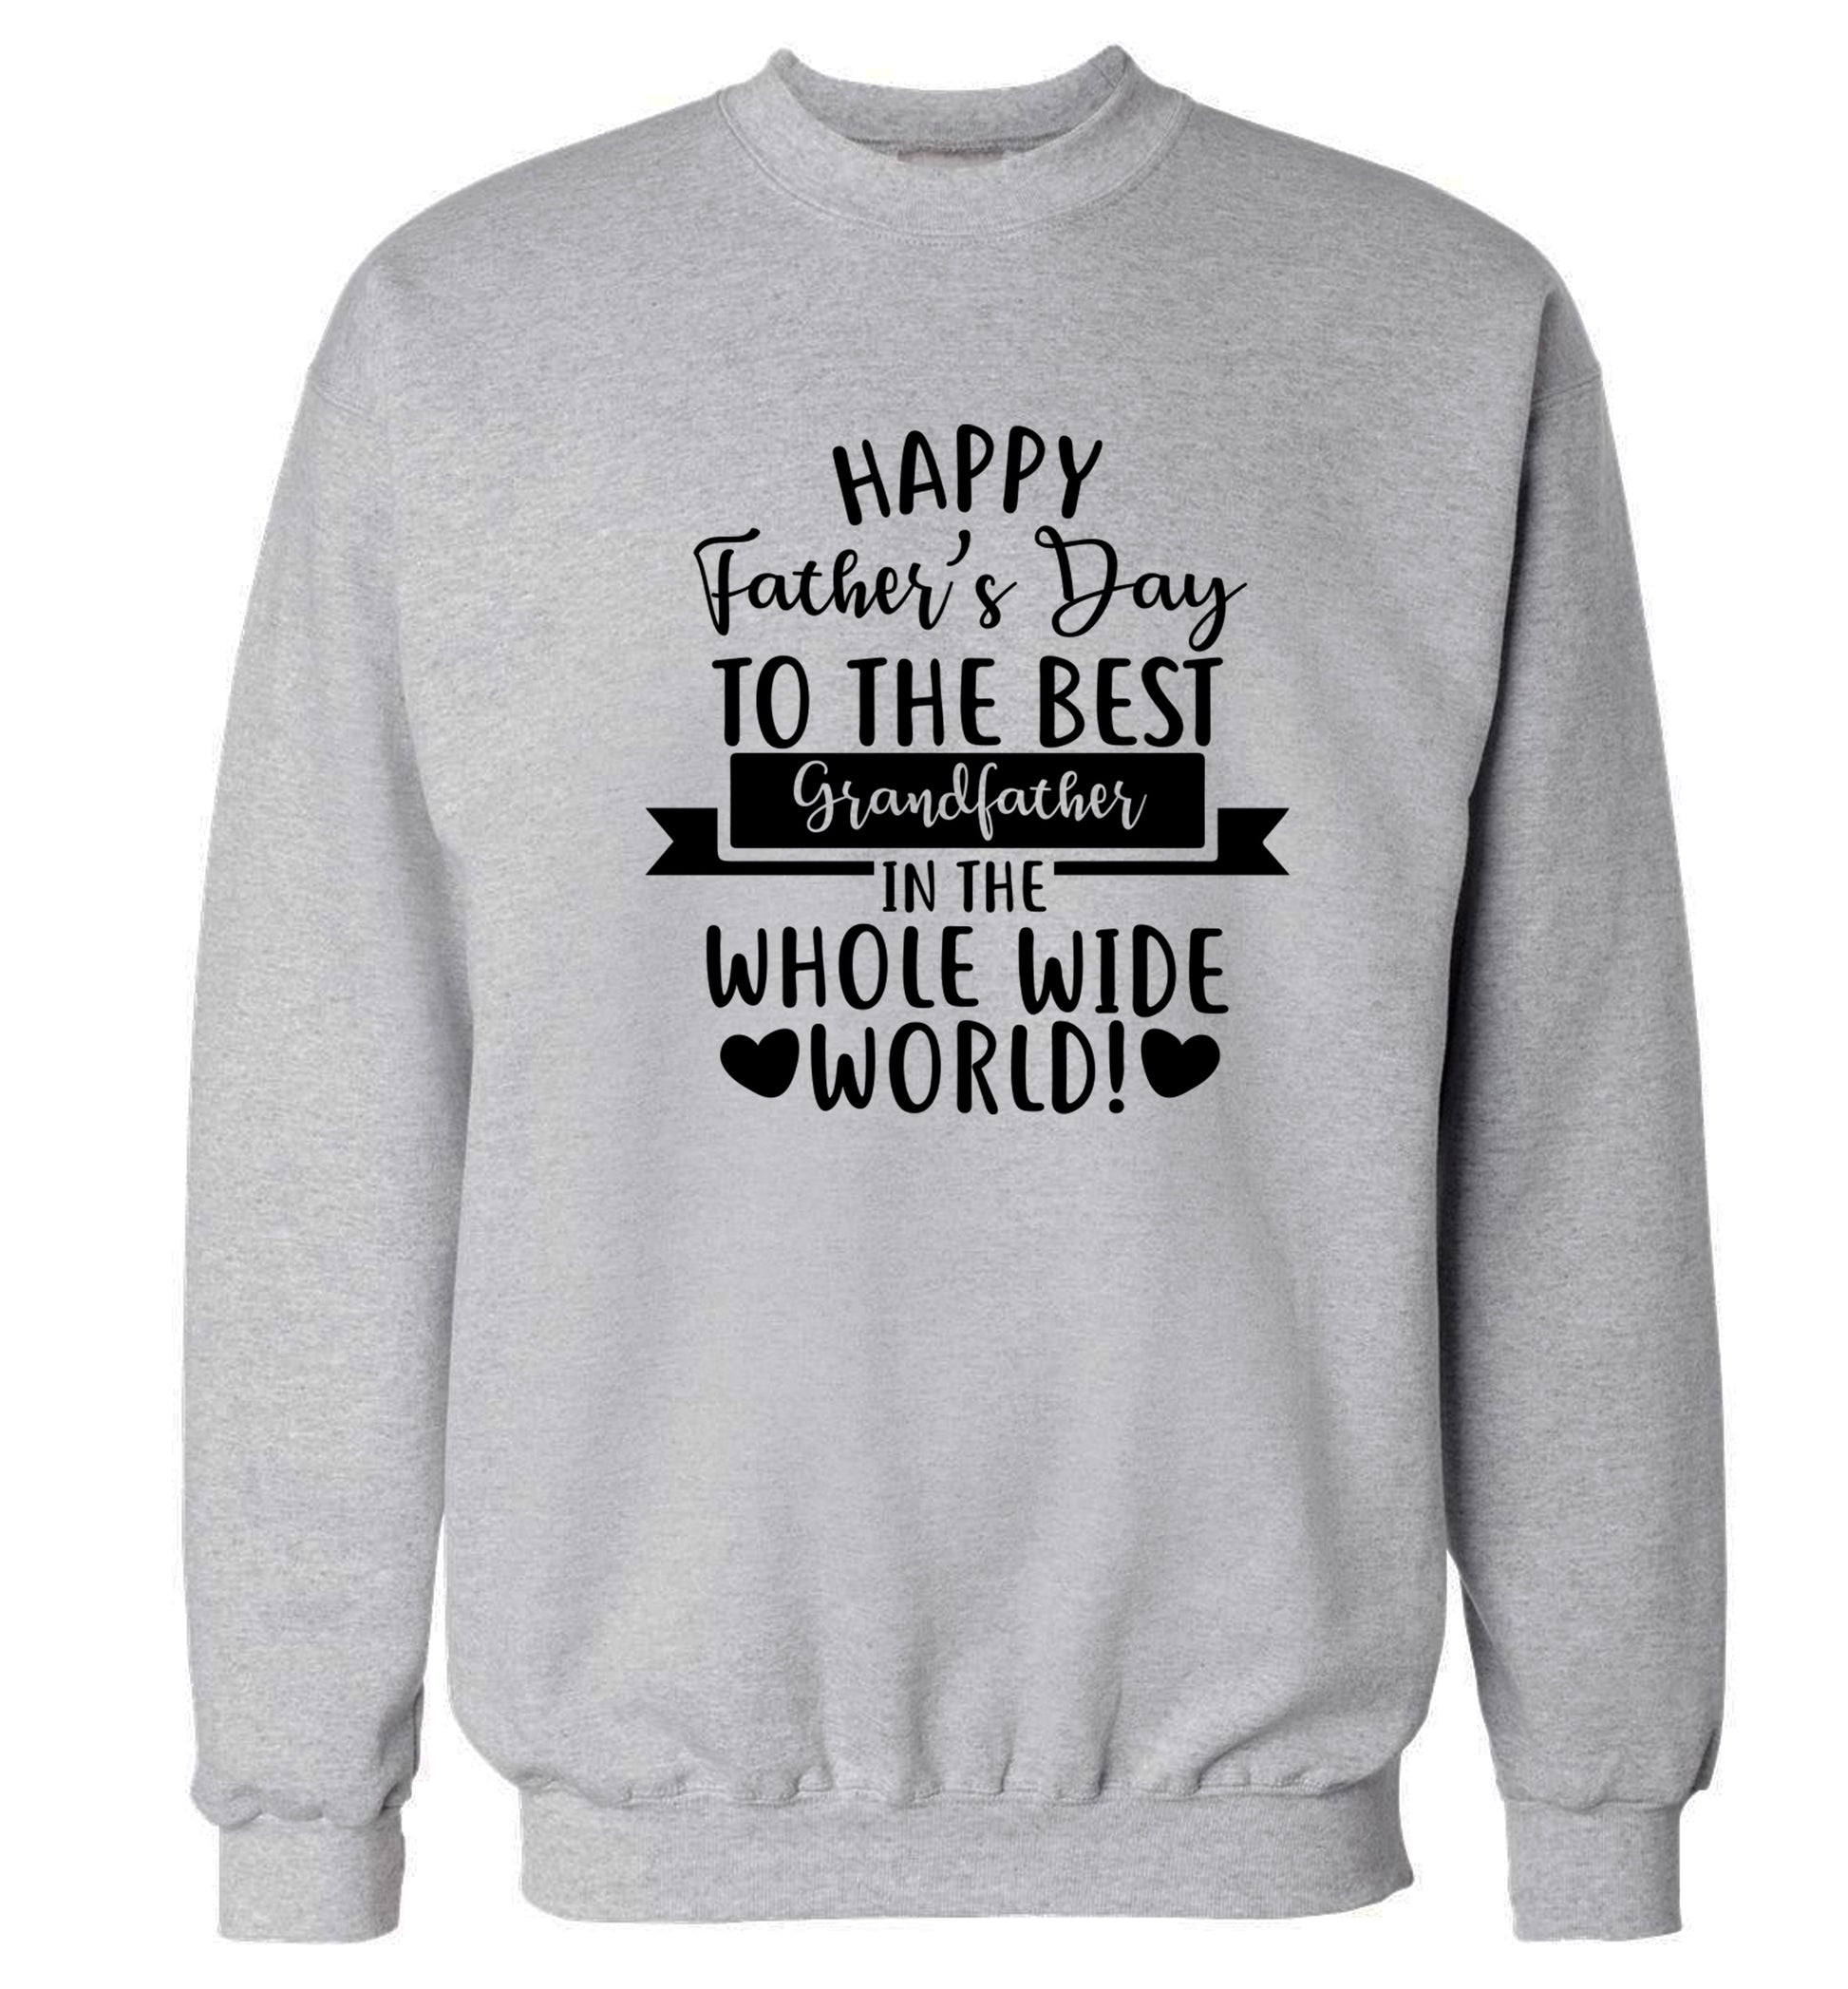 Happy Father's Day to the best grandfather in the world Adult's unisex grey Sweater 2XL